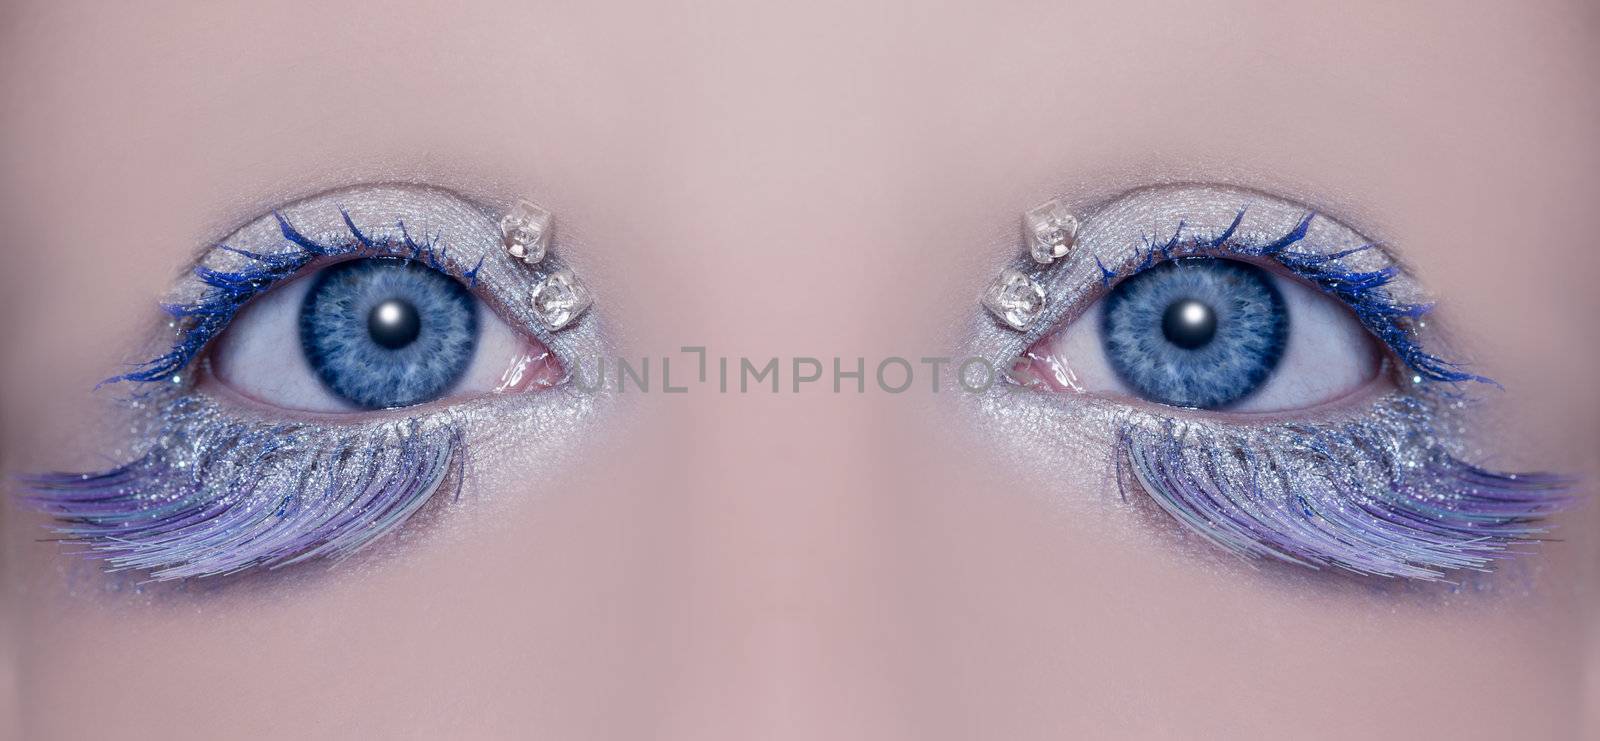 Blue eye macro closeup with a winter inspired silver makeup some jewels and feather eyelashes